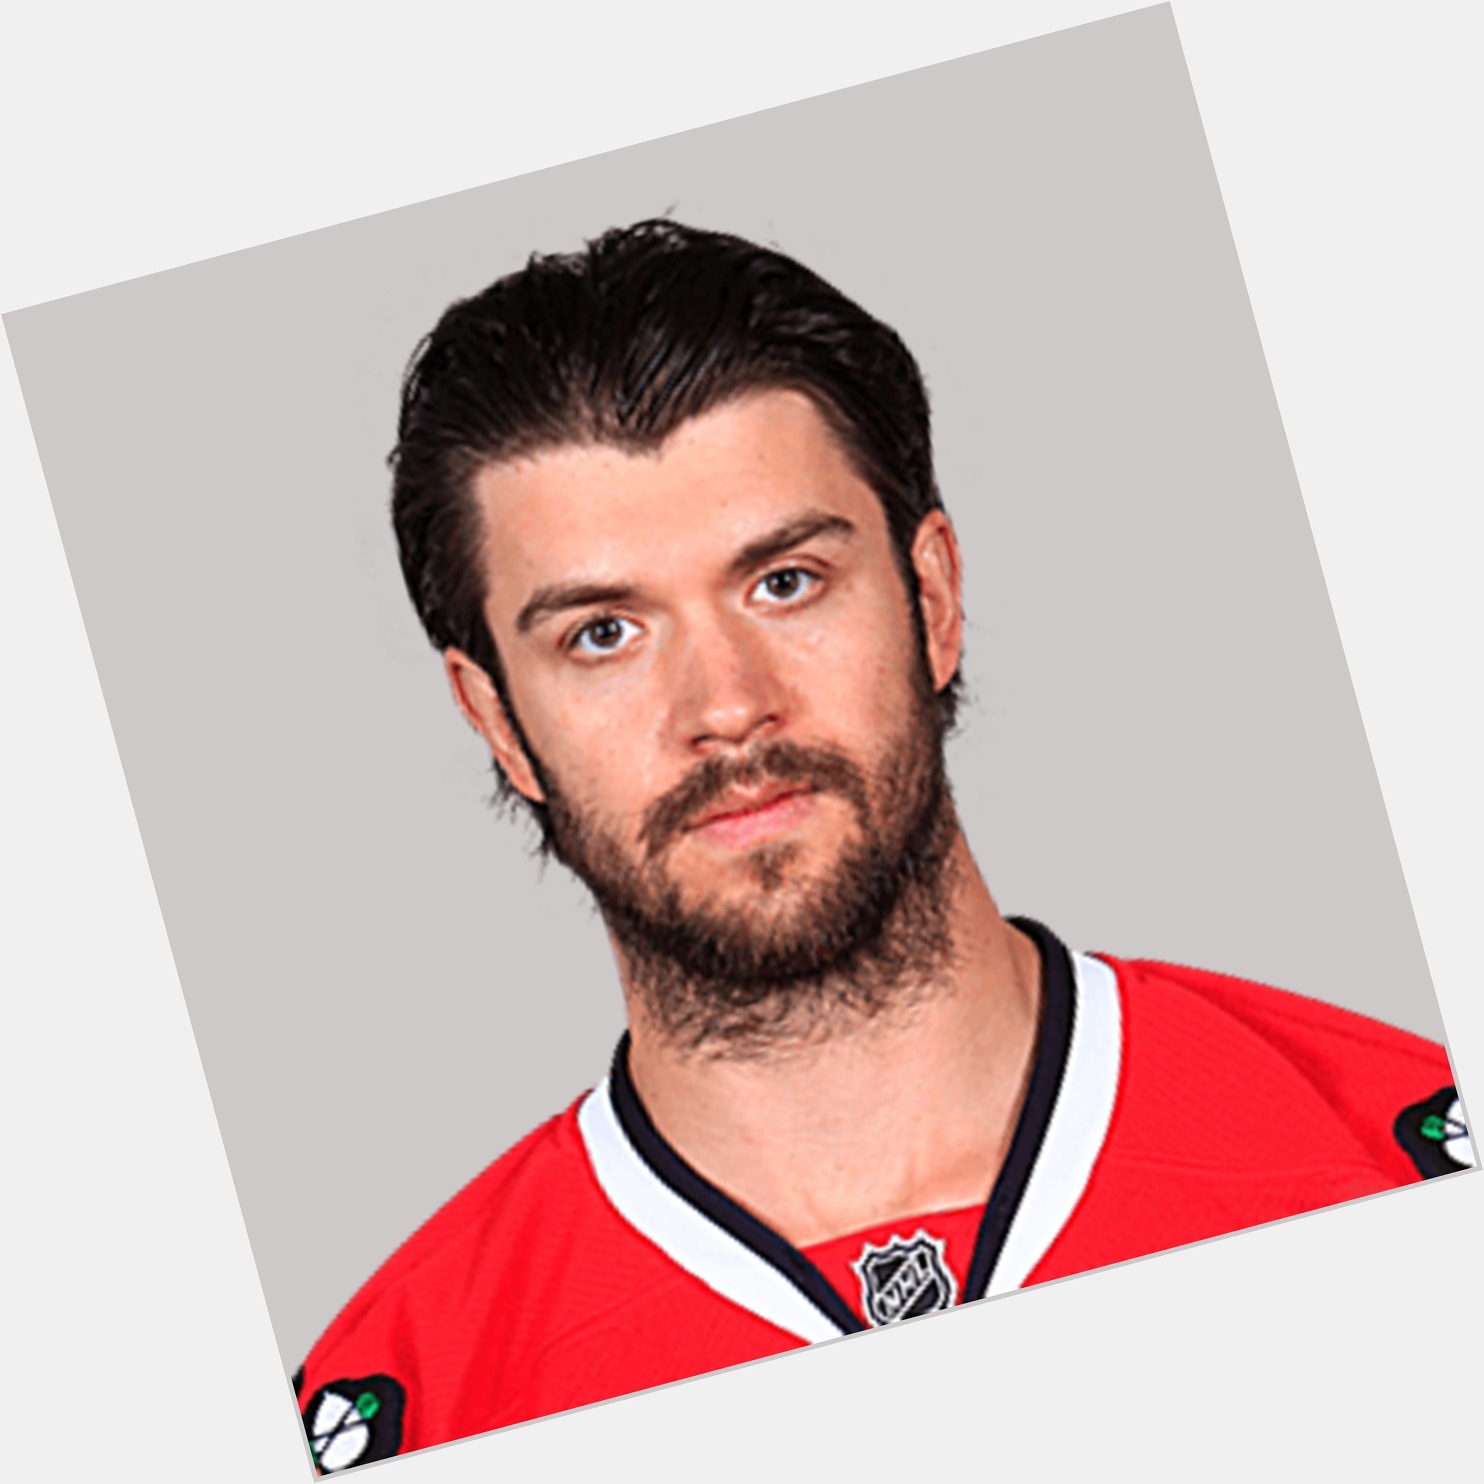 <a href="/hot-men/brent-seabrook/where-dating-news-photos">Brent Seabrook</a> Athletic body,  dark brown hair & hairstyles